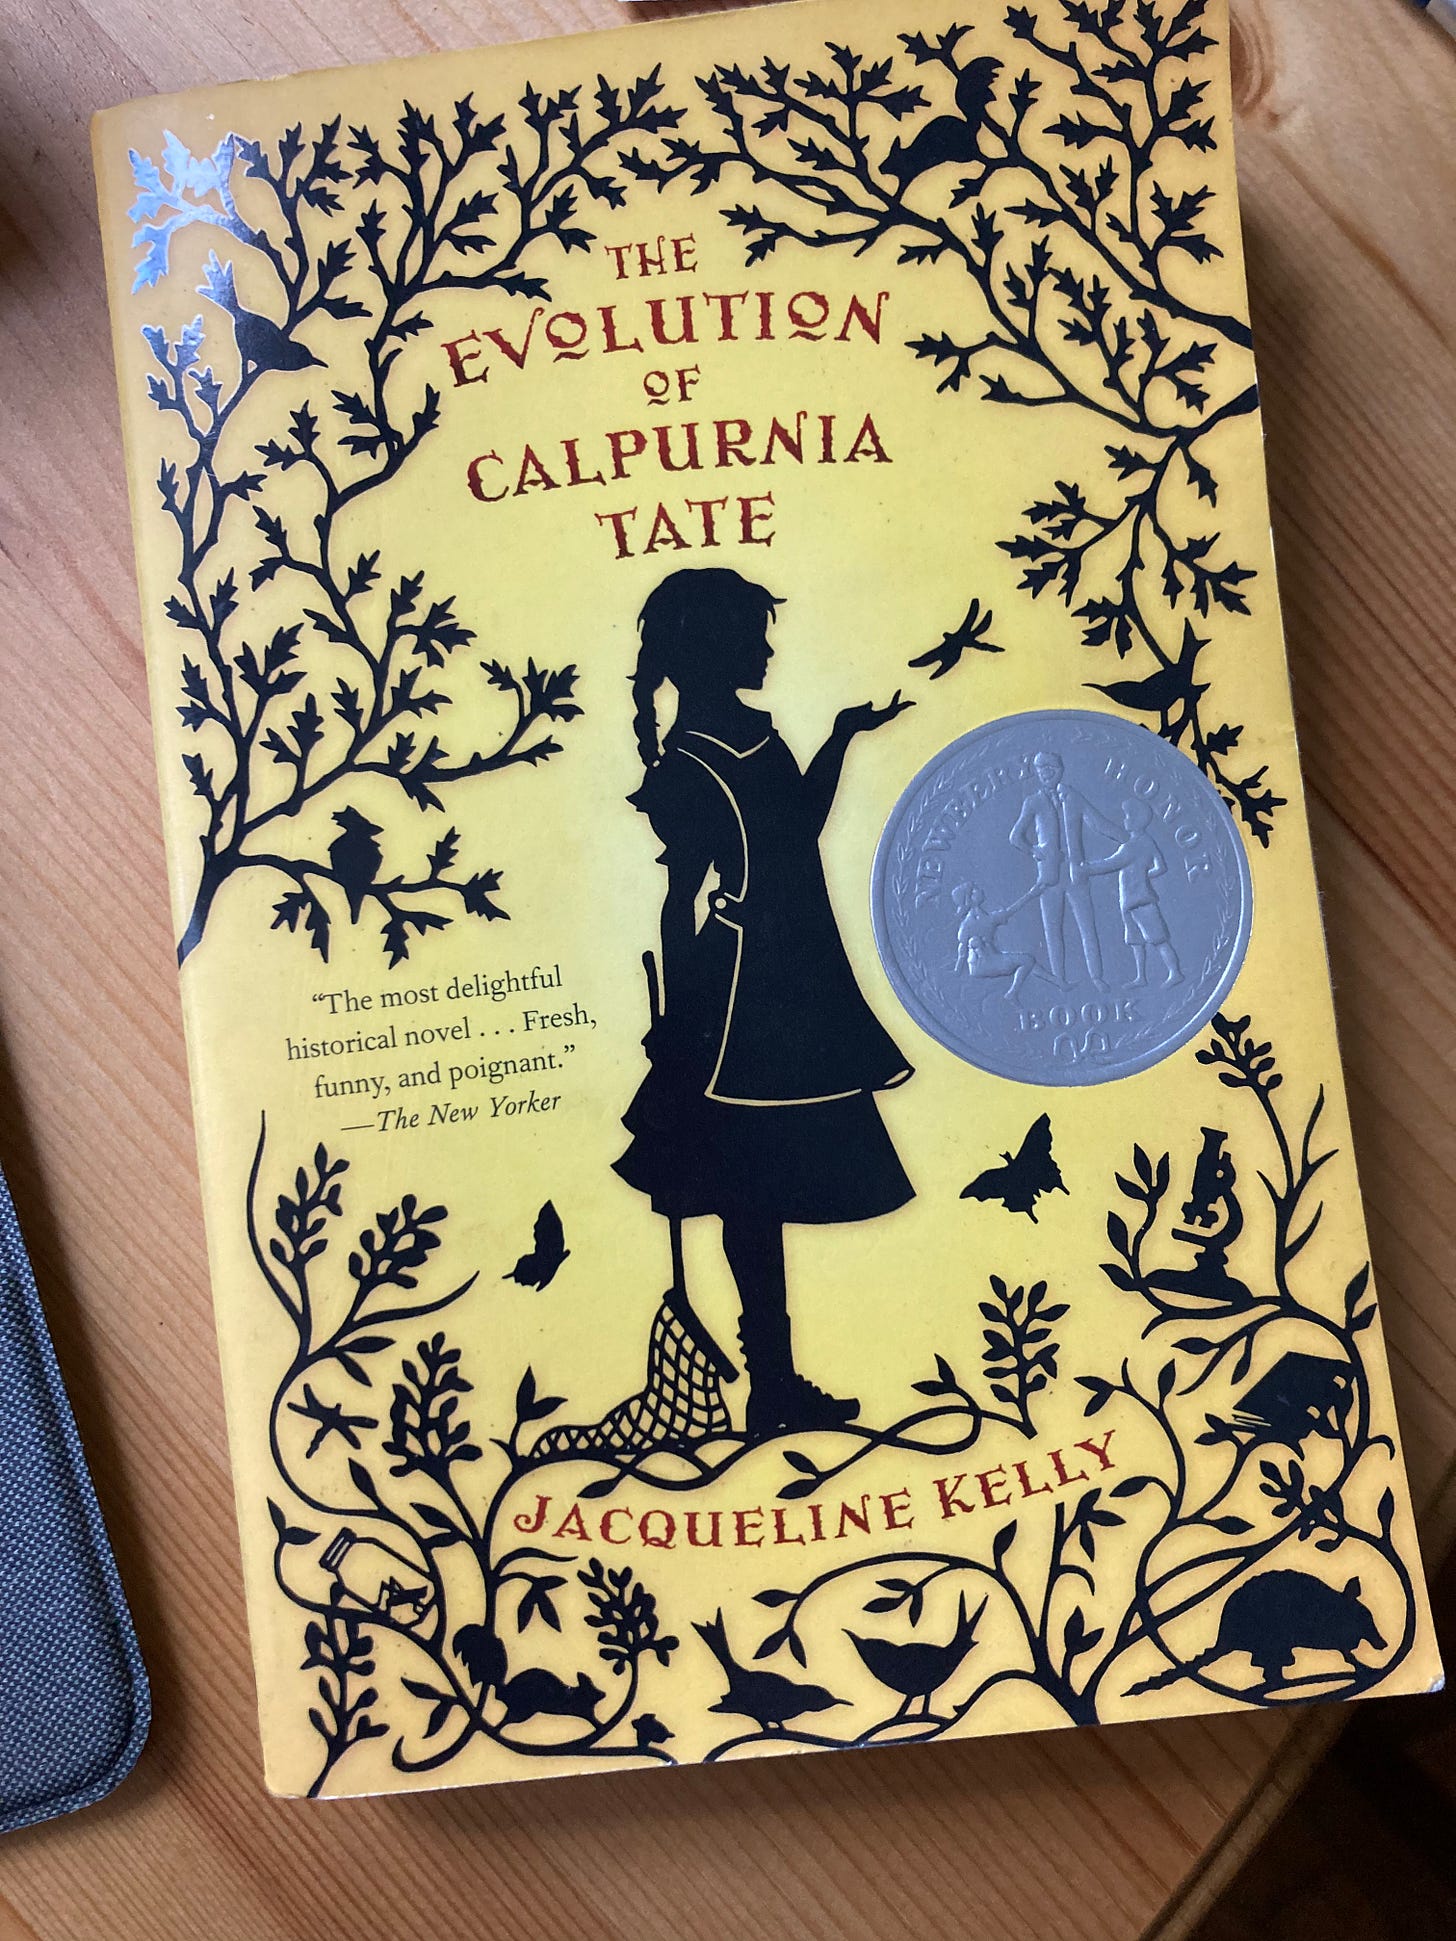 The Evolution of Calpurnia Tate bye Jacqueline Kelly book cover. A yellow book with black vines/leaves, animals and a girl. 